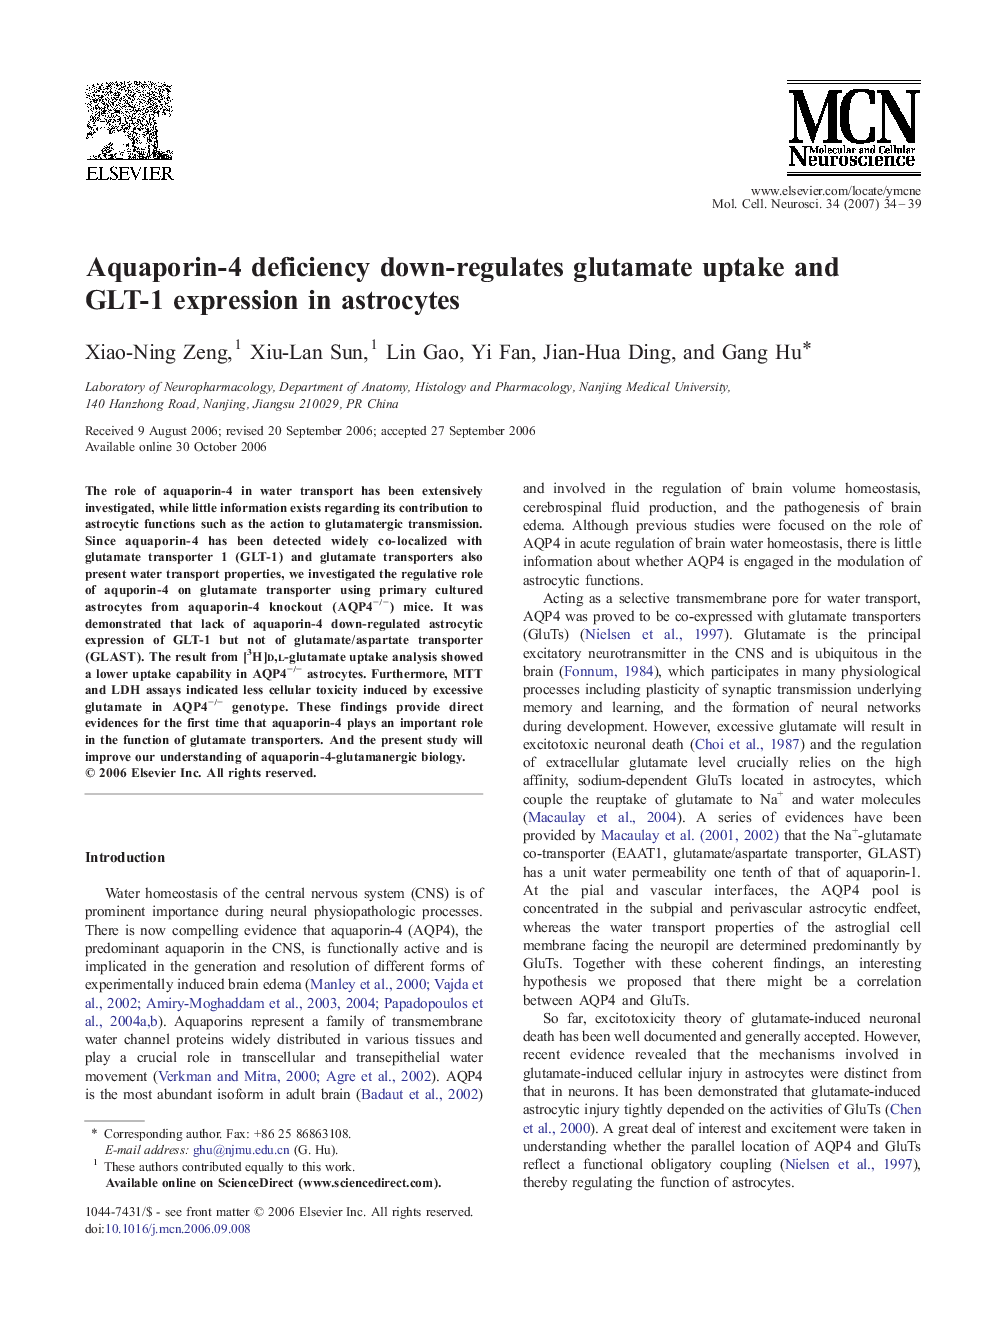 Aquaporin-4 deficiency down-regulates glutamate uptake and GLT-1 expression in astrocytes